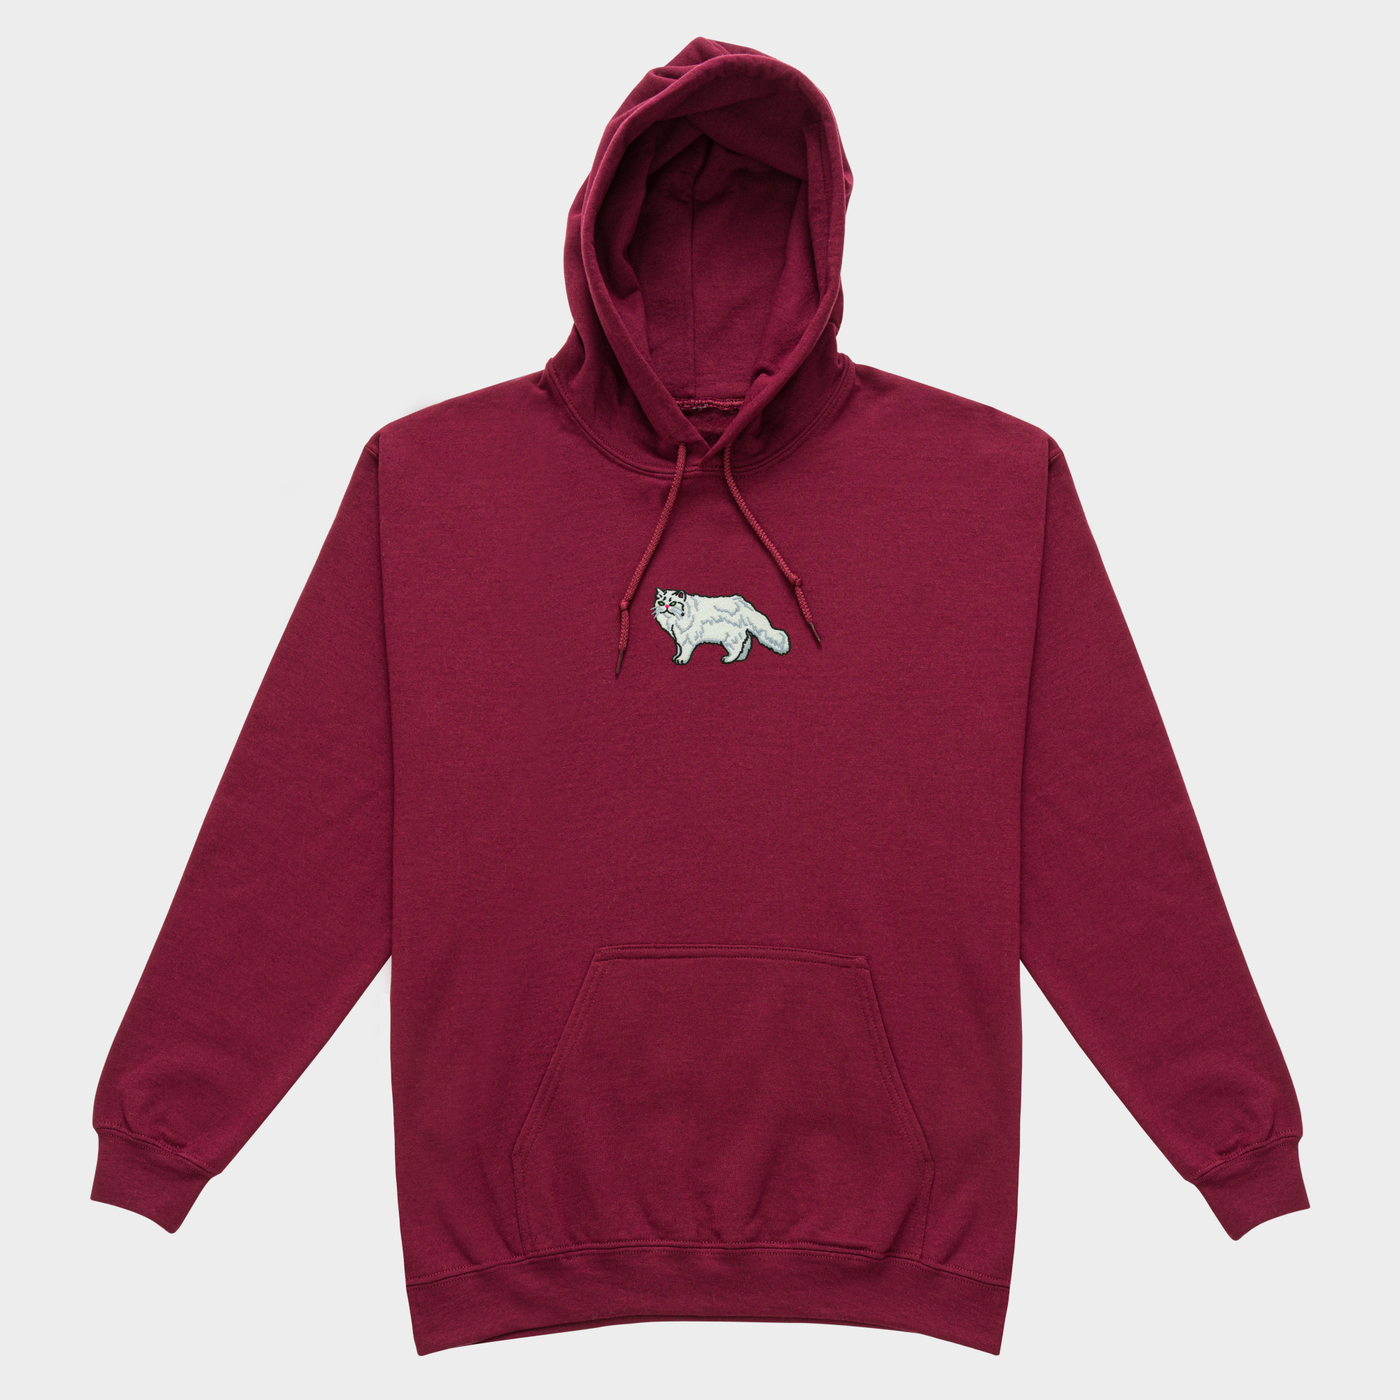 Bobby's Planet Women's Embroidered Persian Hoodie from Paws Dog Cat Animals Collection in Maroon Color#color_maroon